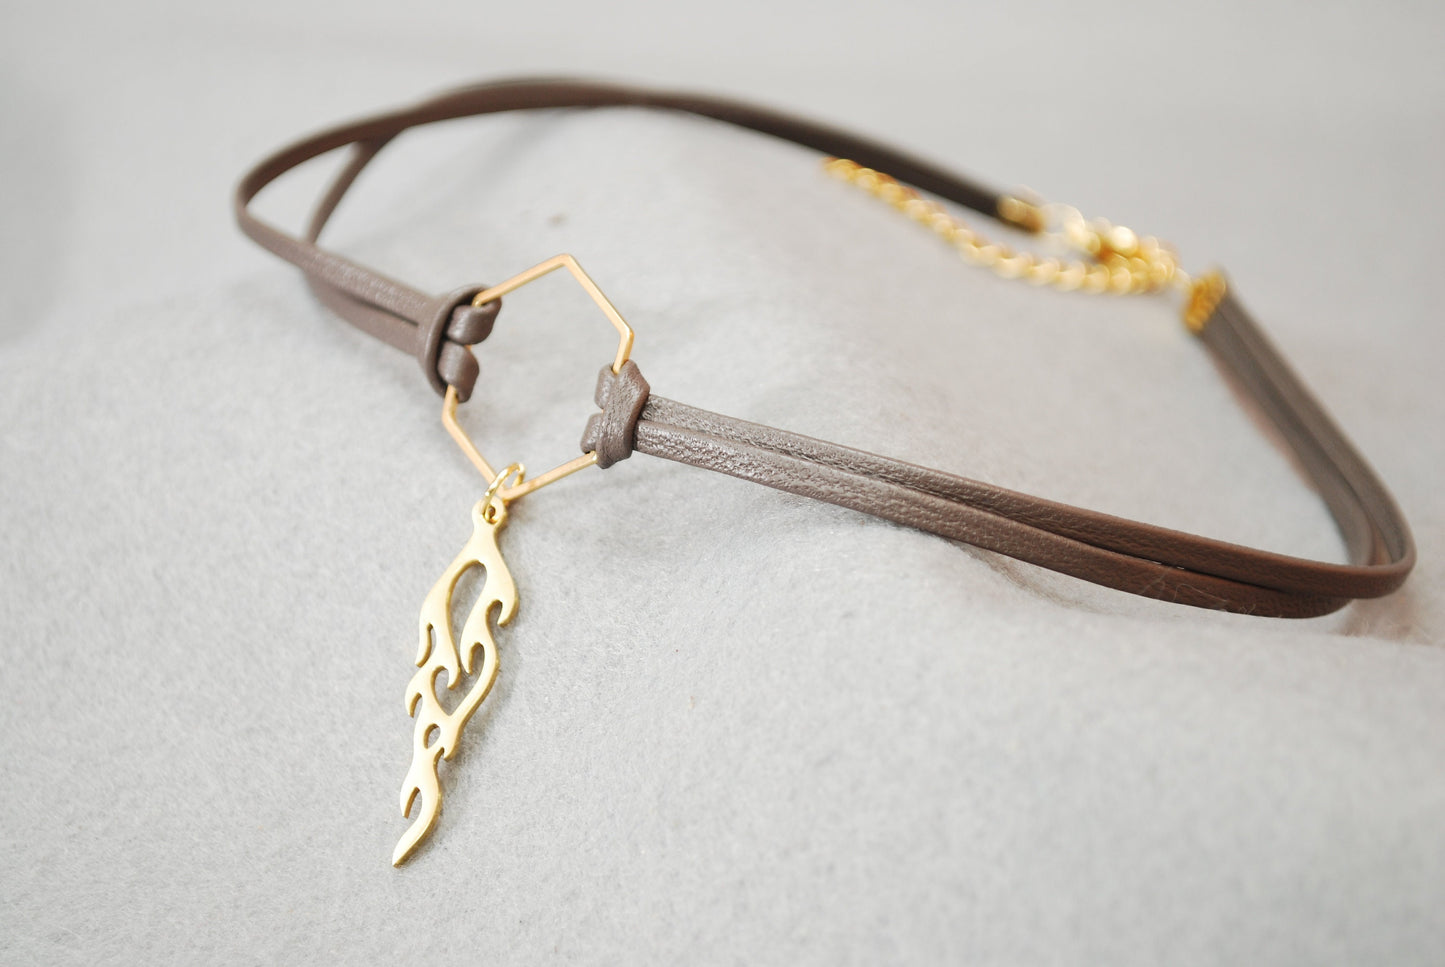 Gold Leather Choker - 13 Inches with Adjustable Chain: Hexagonal Pendant, Stainless Steel, Sleek and Sensual Accessory